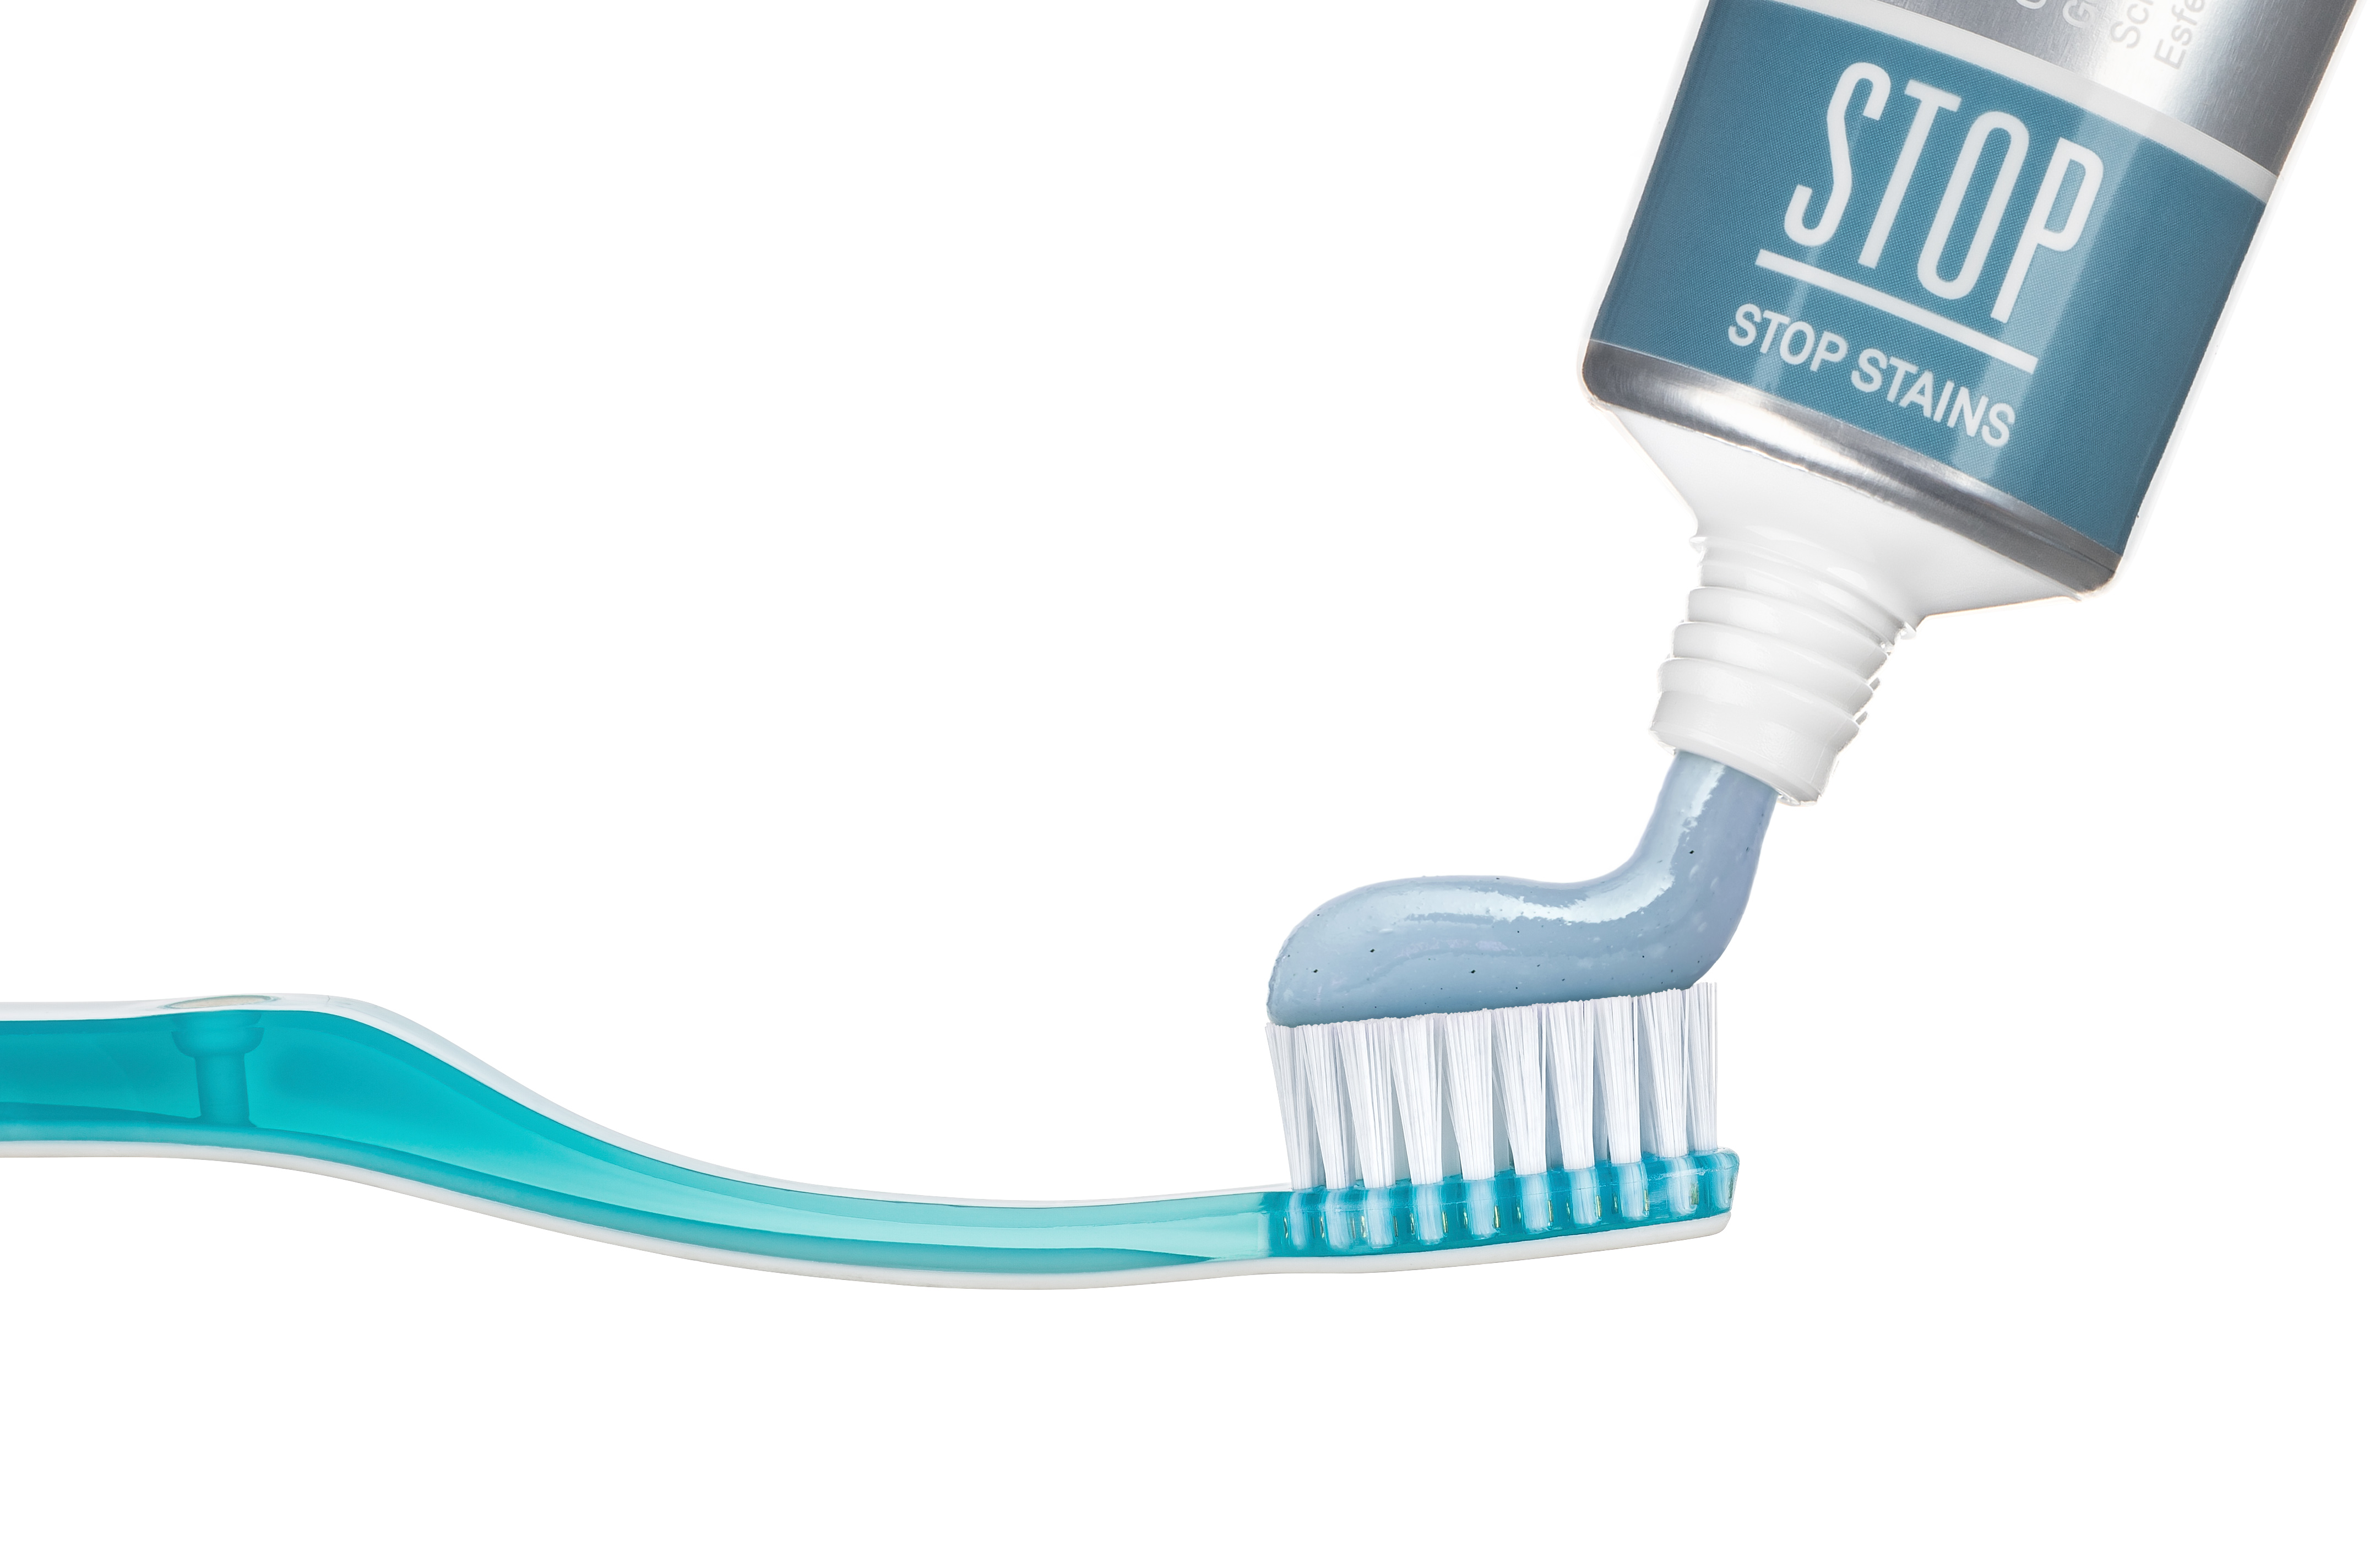 STOP Stains Swiss Whitening toothpaste and ultrasoft toothbrush